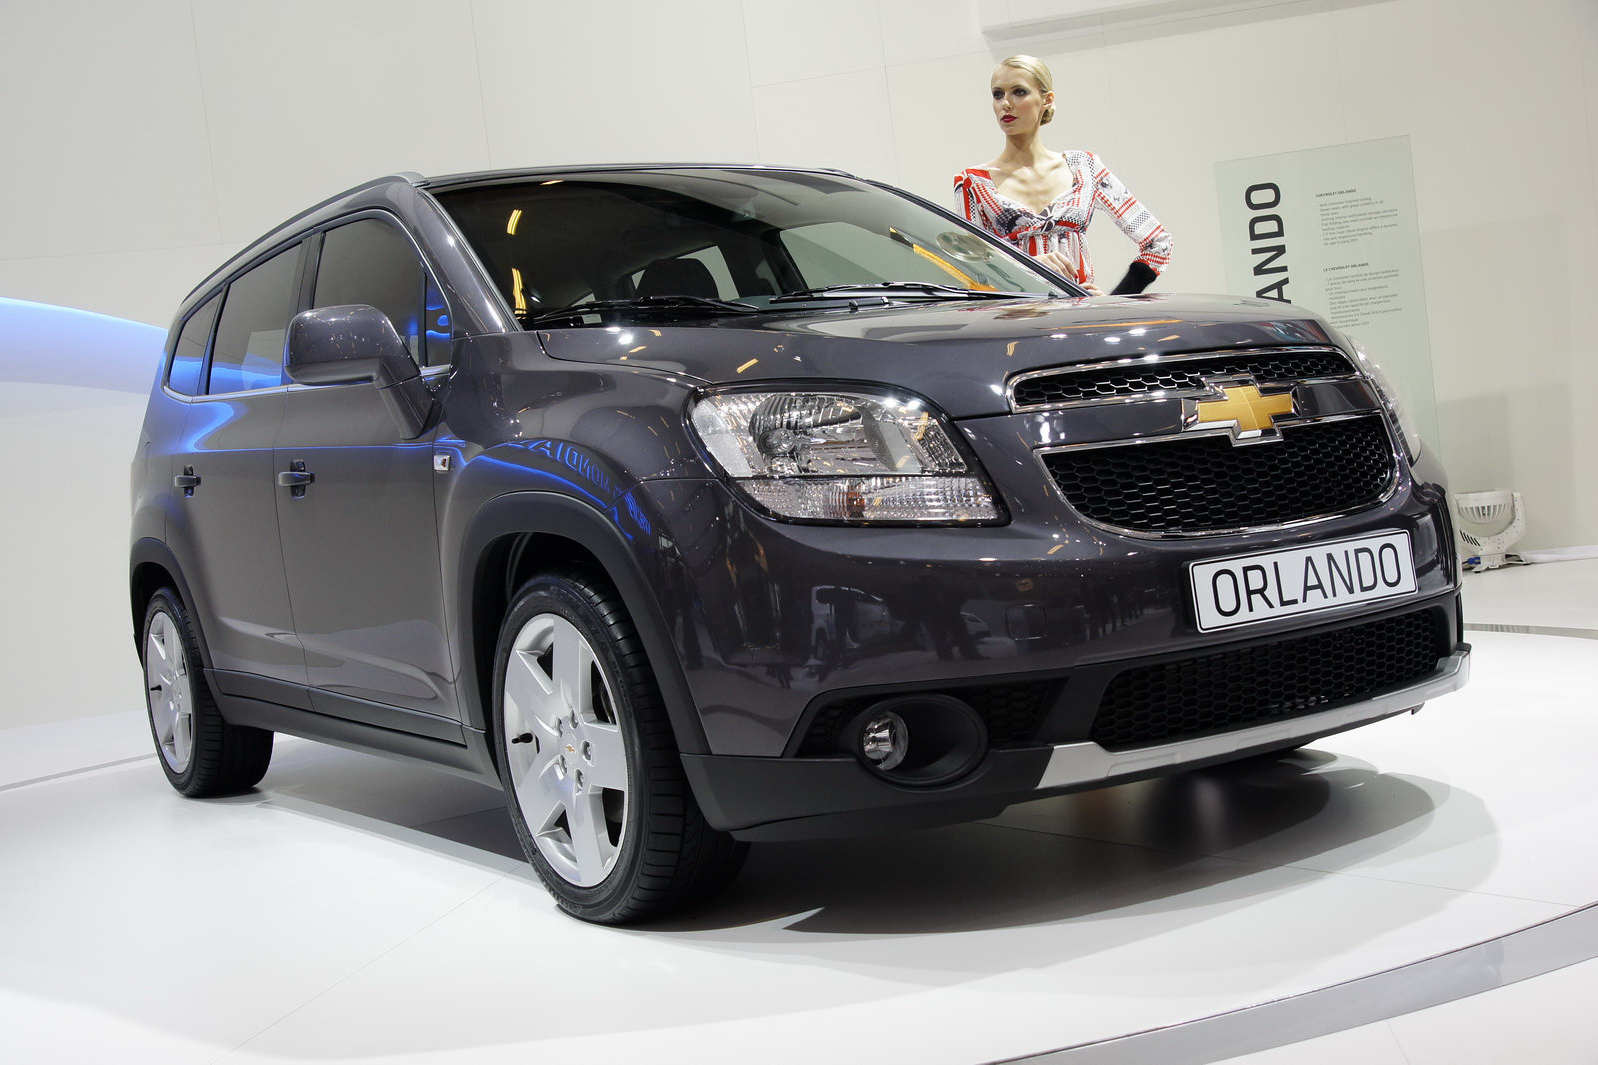 New Chevrolet Orlando MPV Shows up in Paris (With Live Pictures